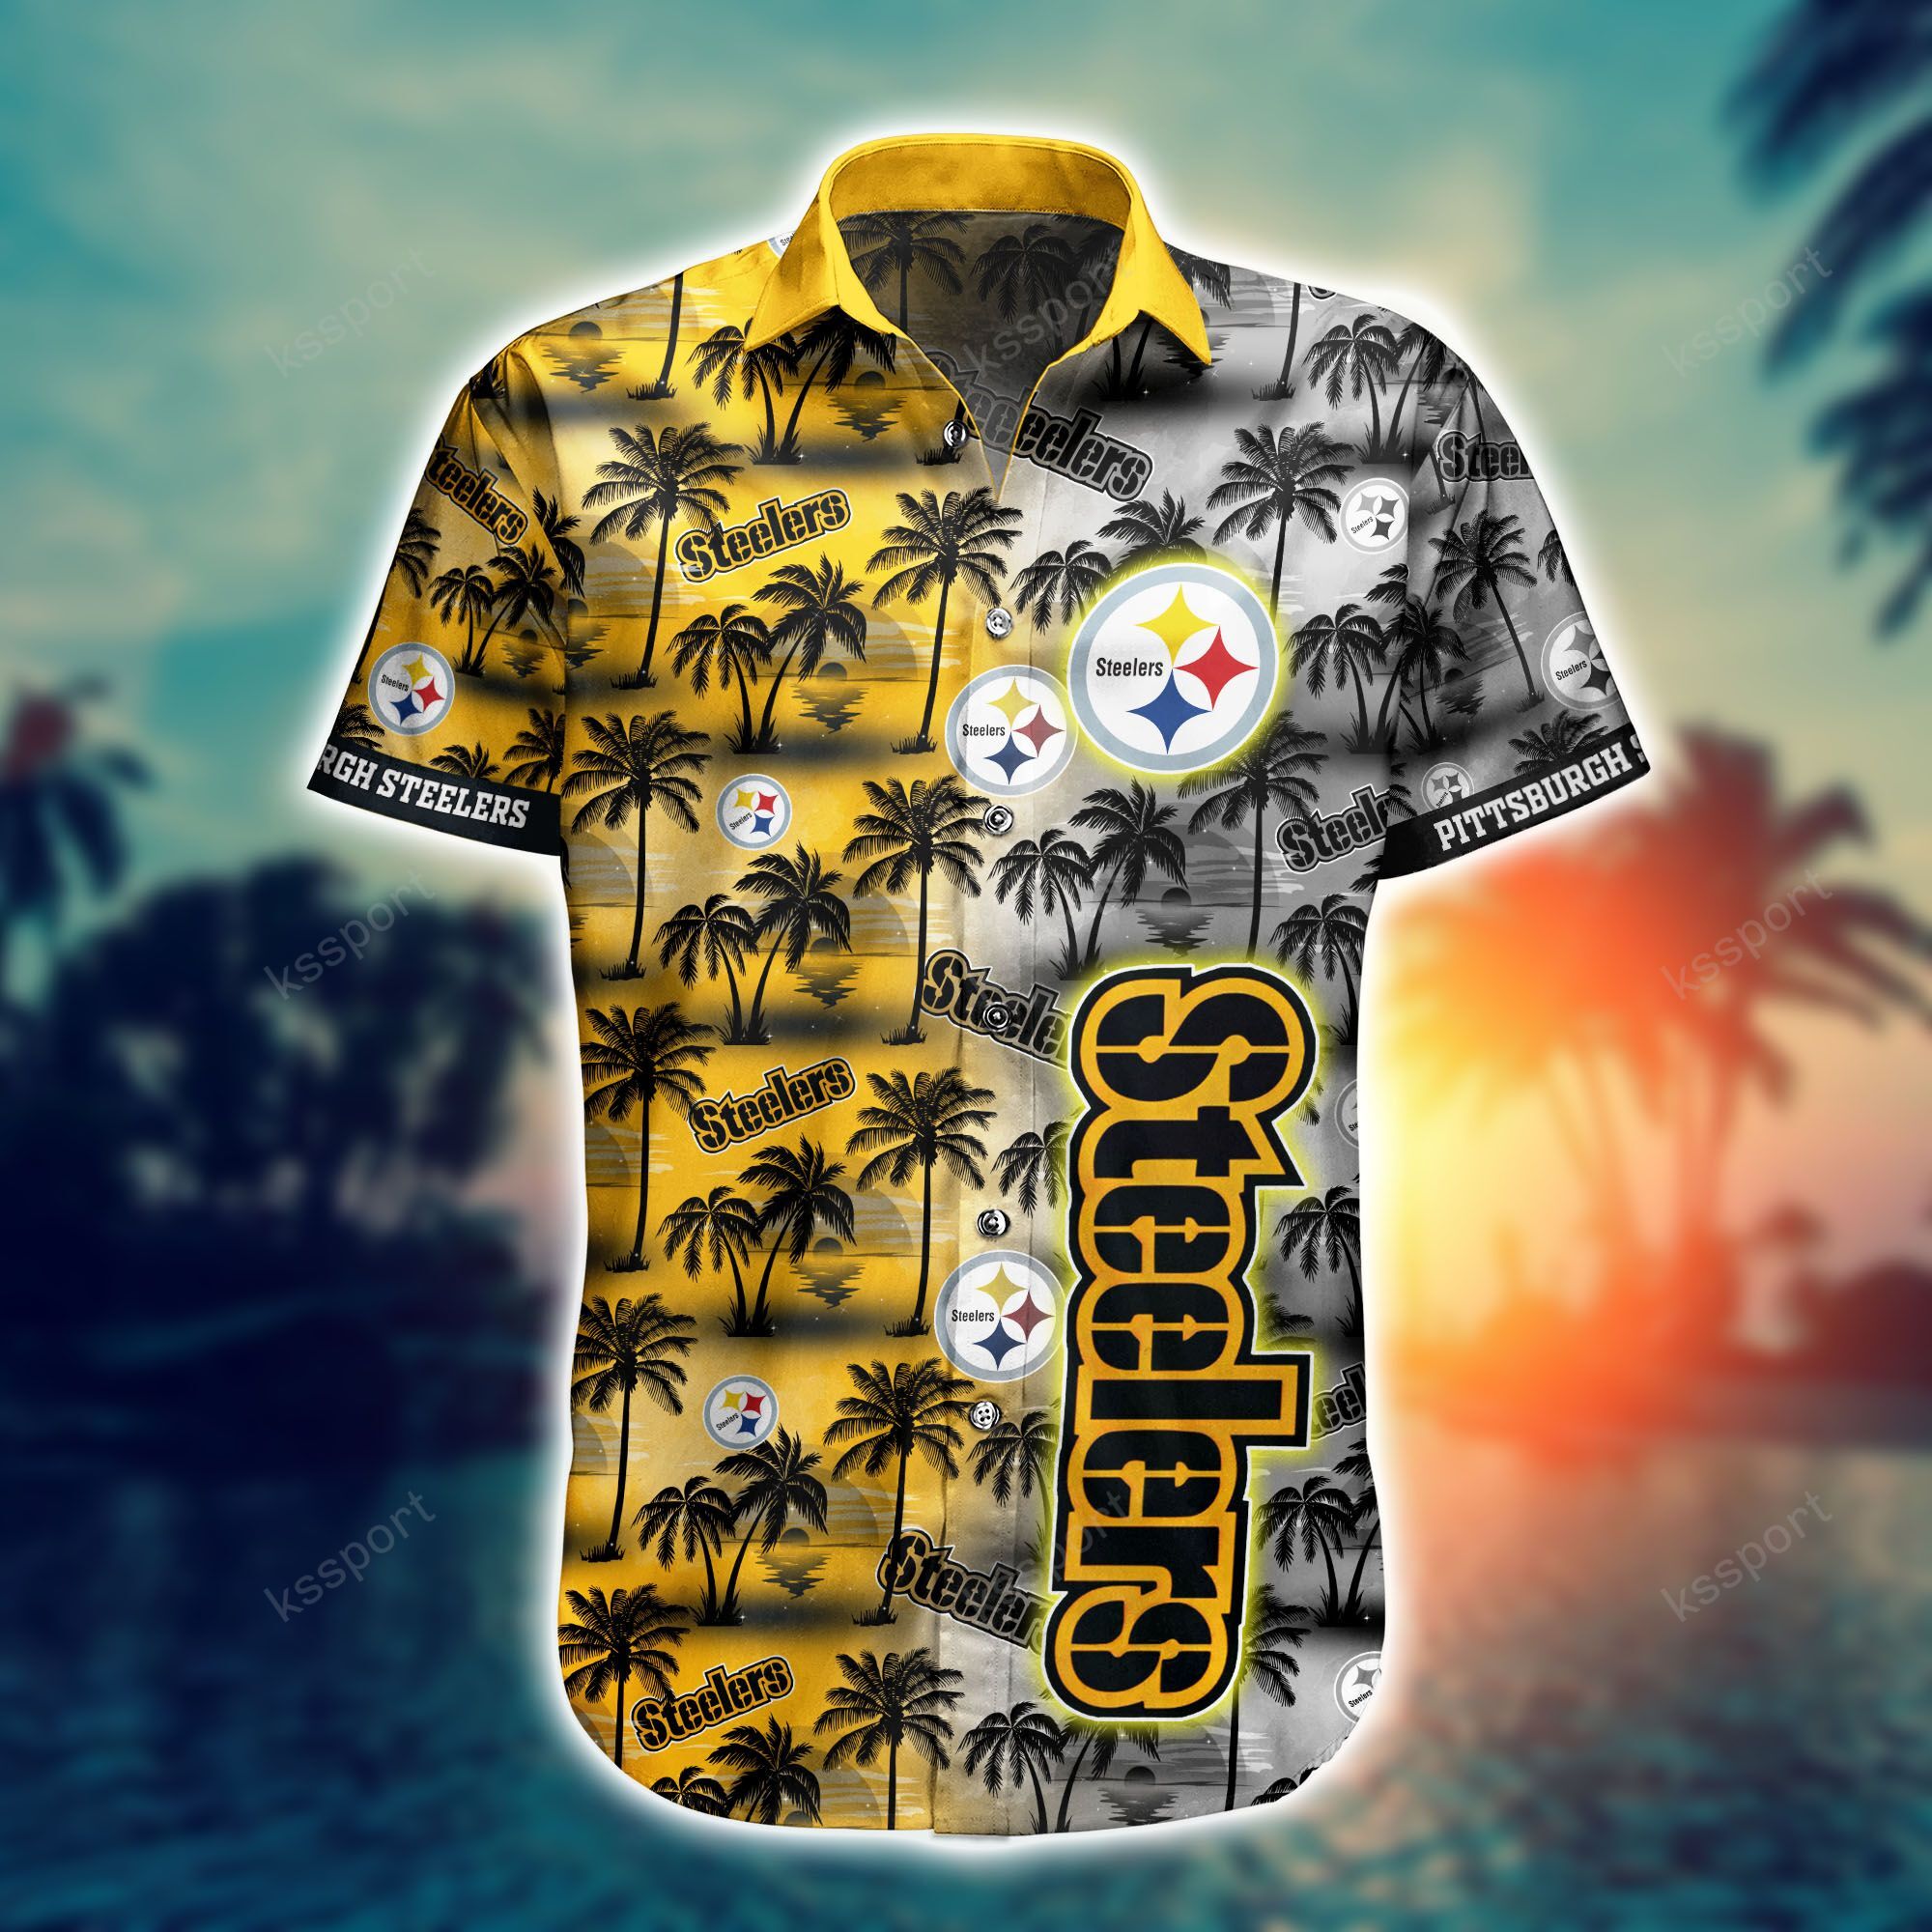 Top cool Hawaiian shirt 2022 - Make sure you get yours today before they run out! 197